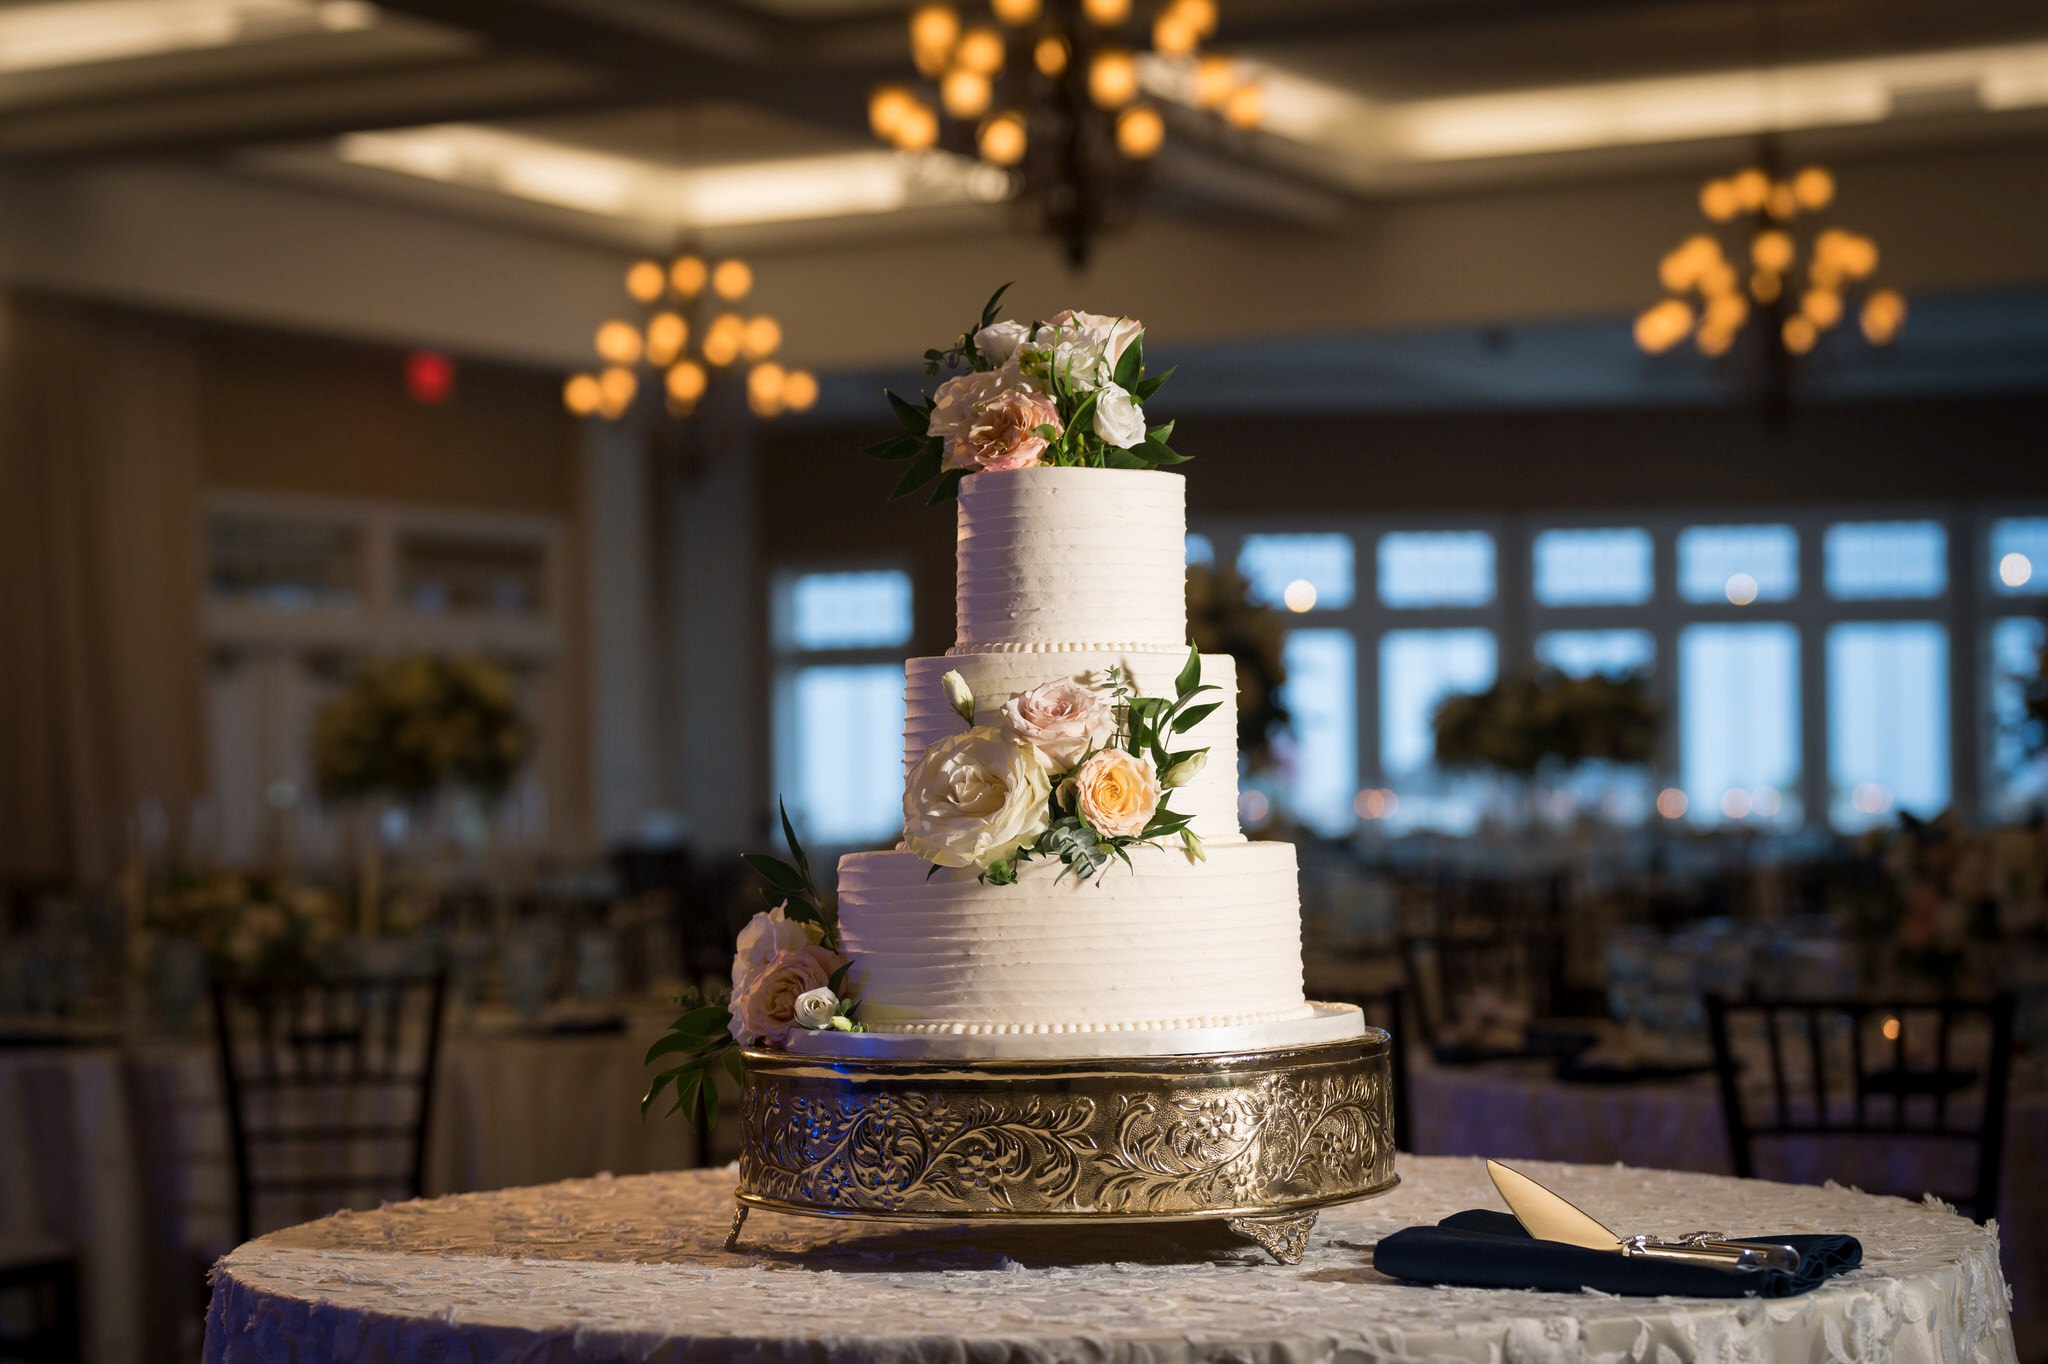 A wedding cake is displayed the ballroom of the Inn at Bay Harbor.  